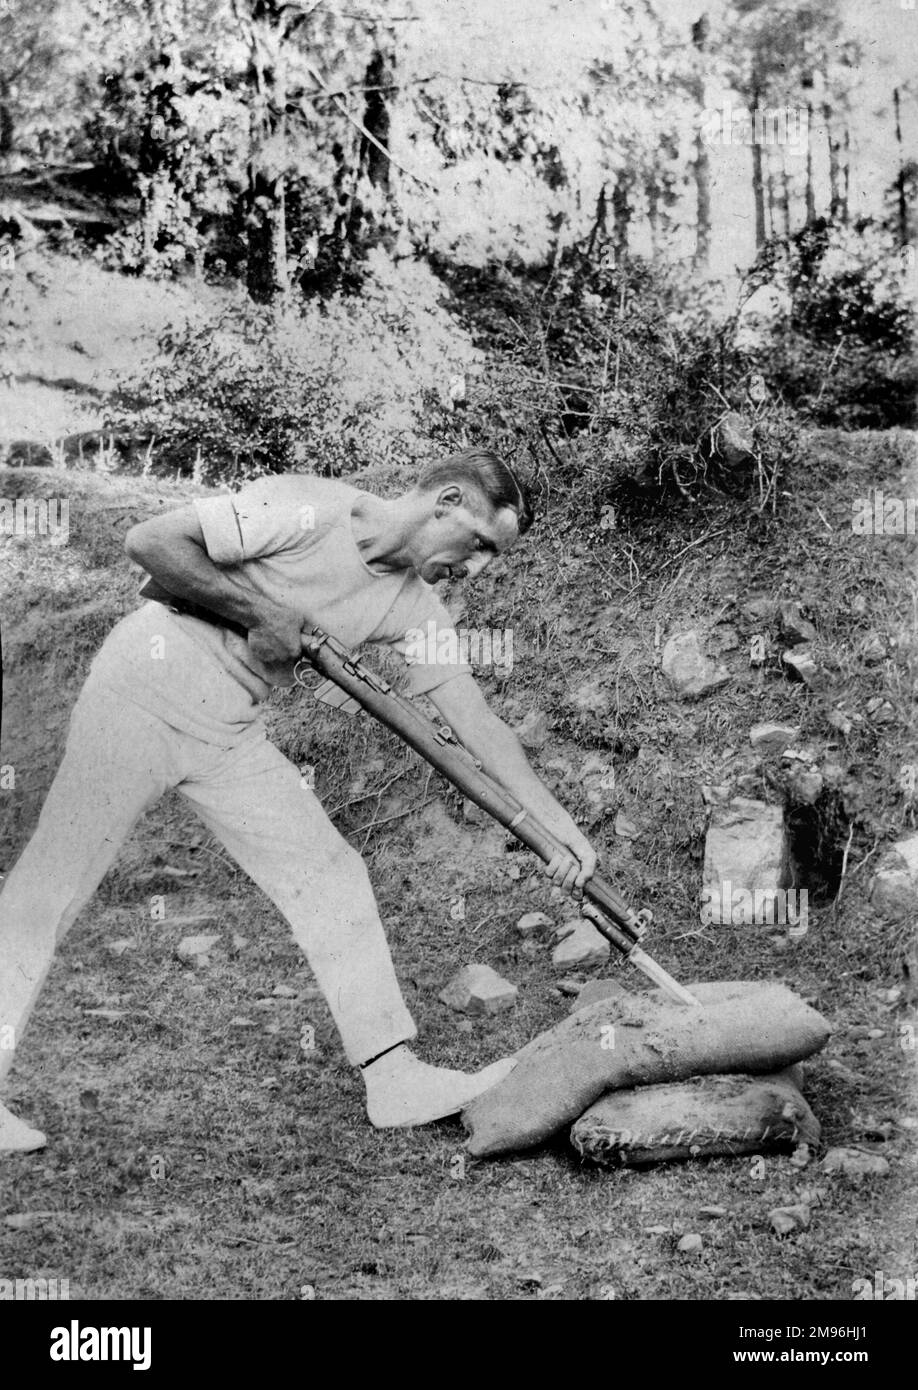 Soldier in side view, stabbing a stuffed sack with a bayoneted rifle, India. Stock Photo